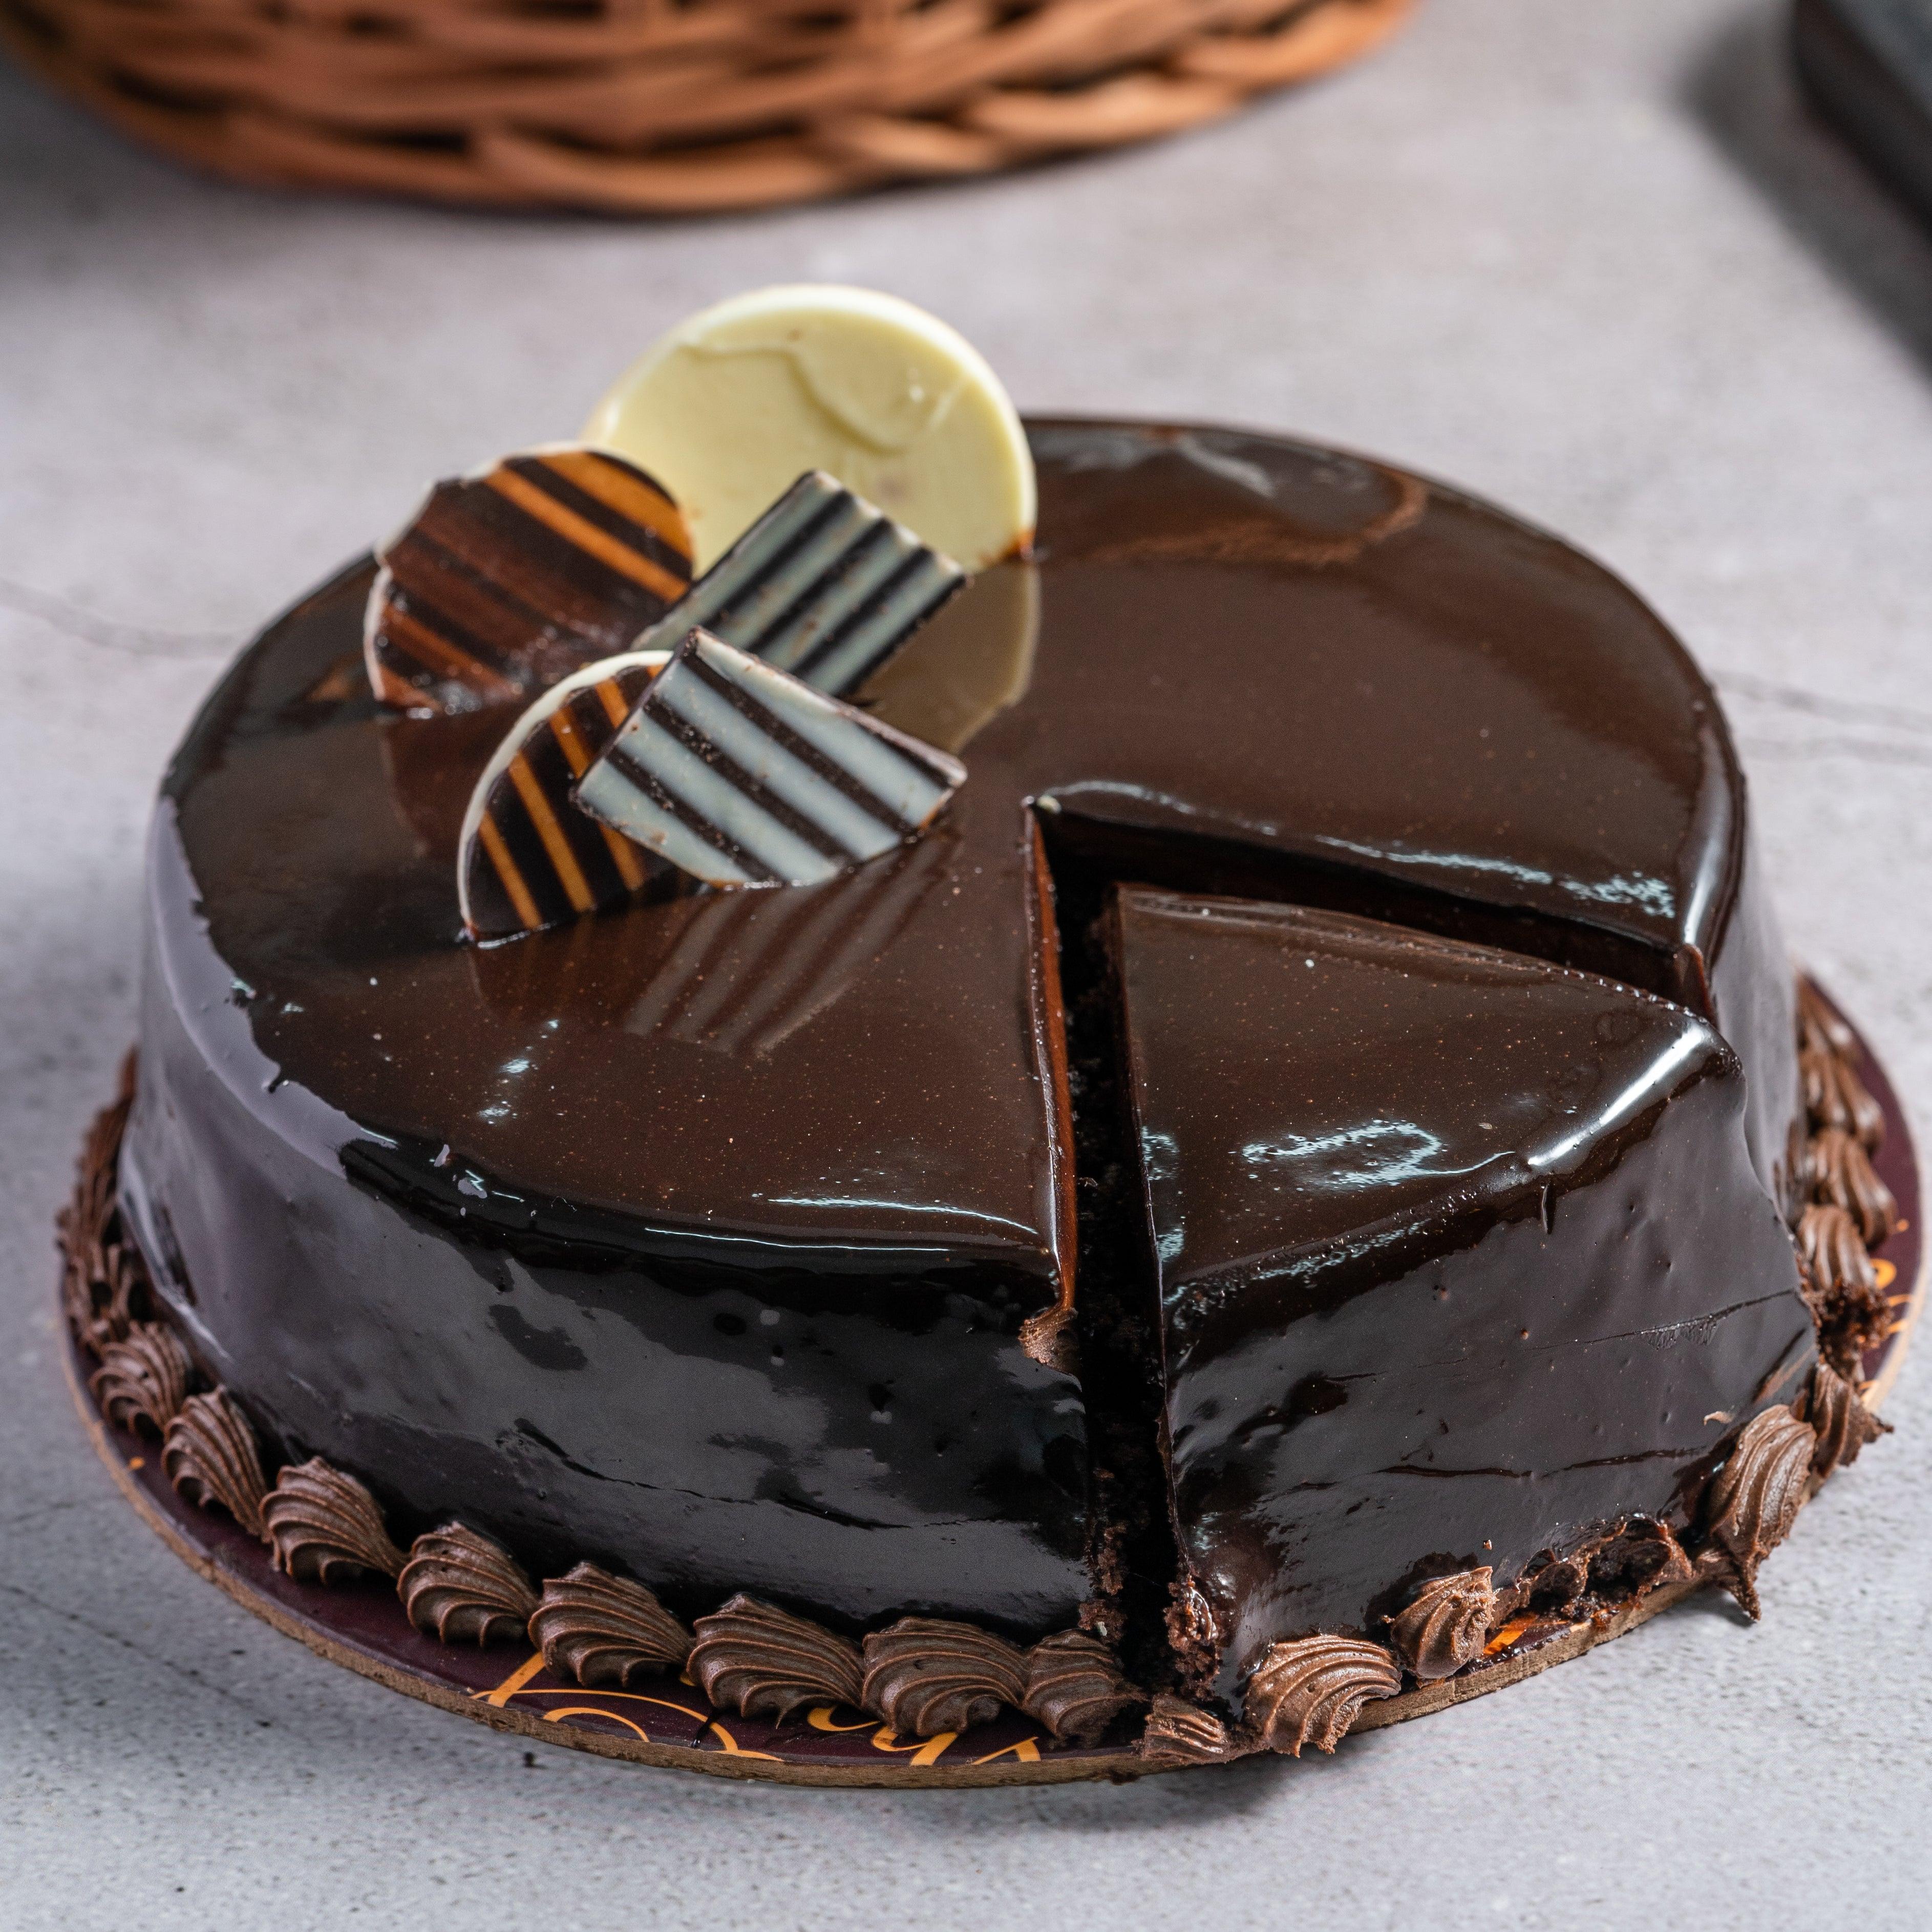 Why You Should Order Chocolate Cake and Why We All Love It - Bakersfun